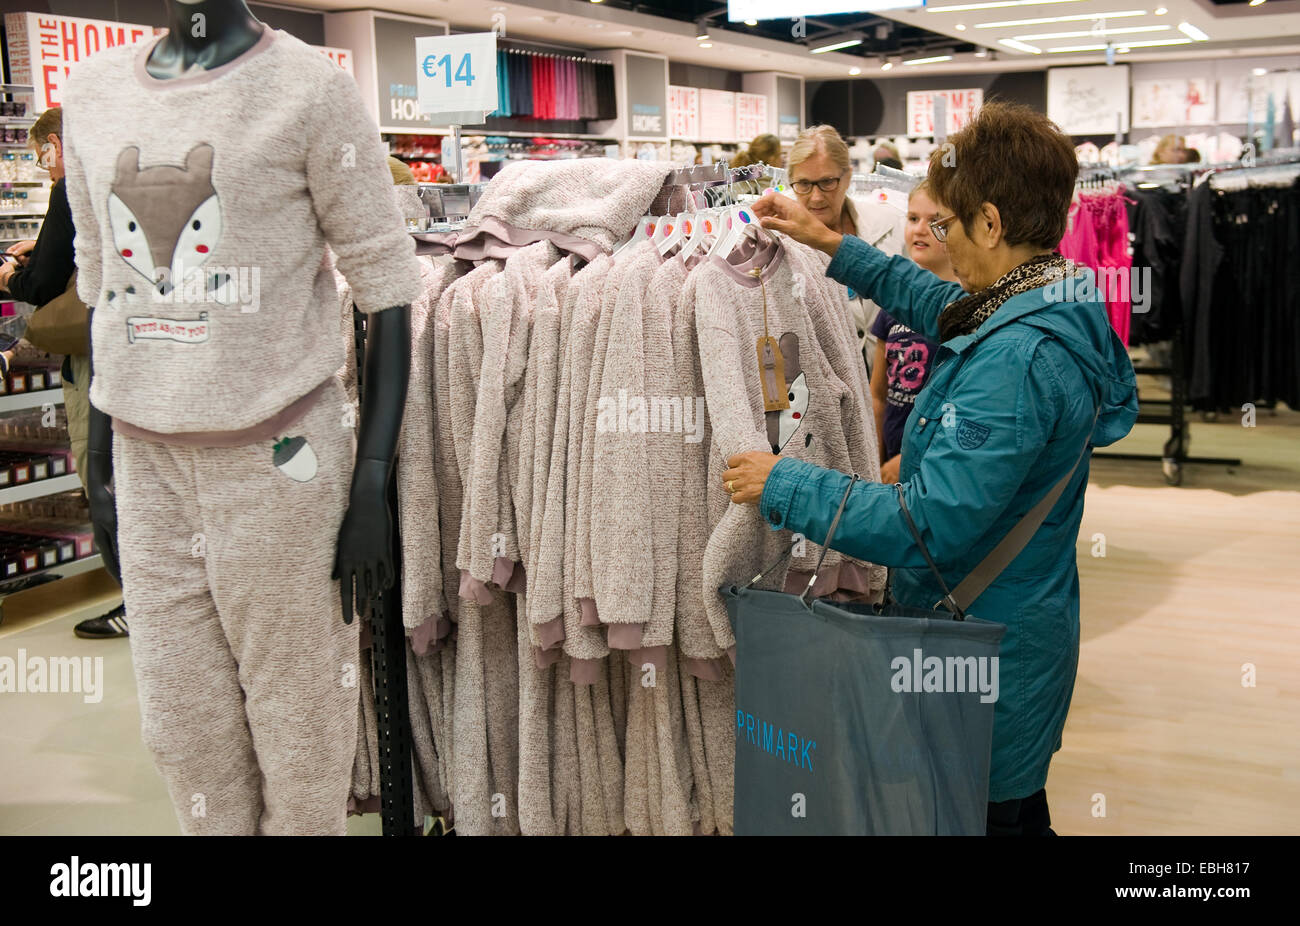 ENSCHEDE, NETHERLANDS - AUG 19, 2014: People are shopping in a new branch of warehouse Primark on the first day at the opening Stock Photo